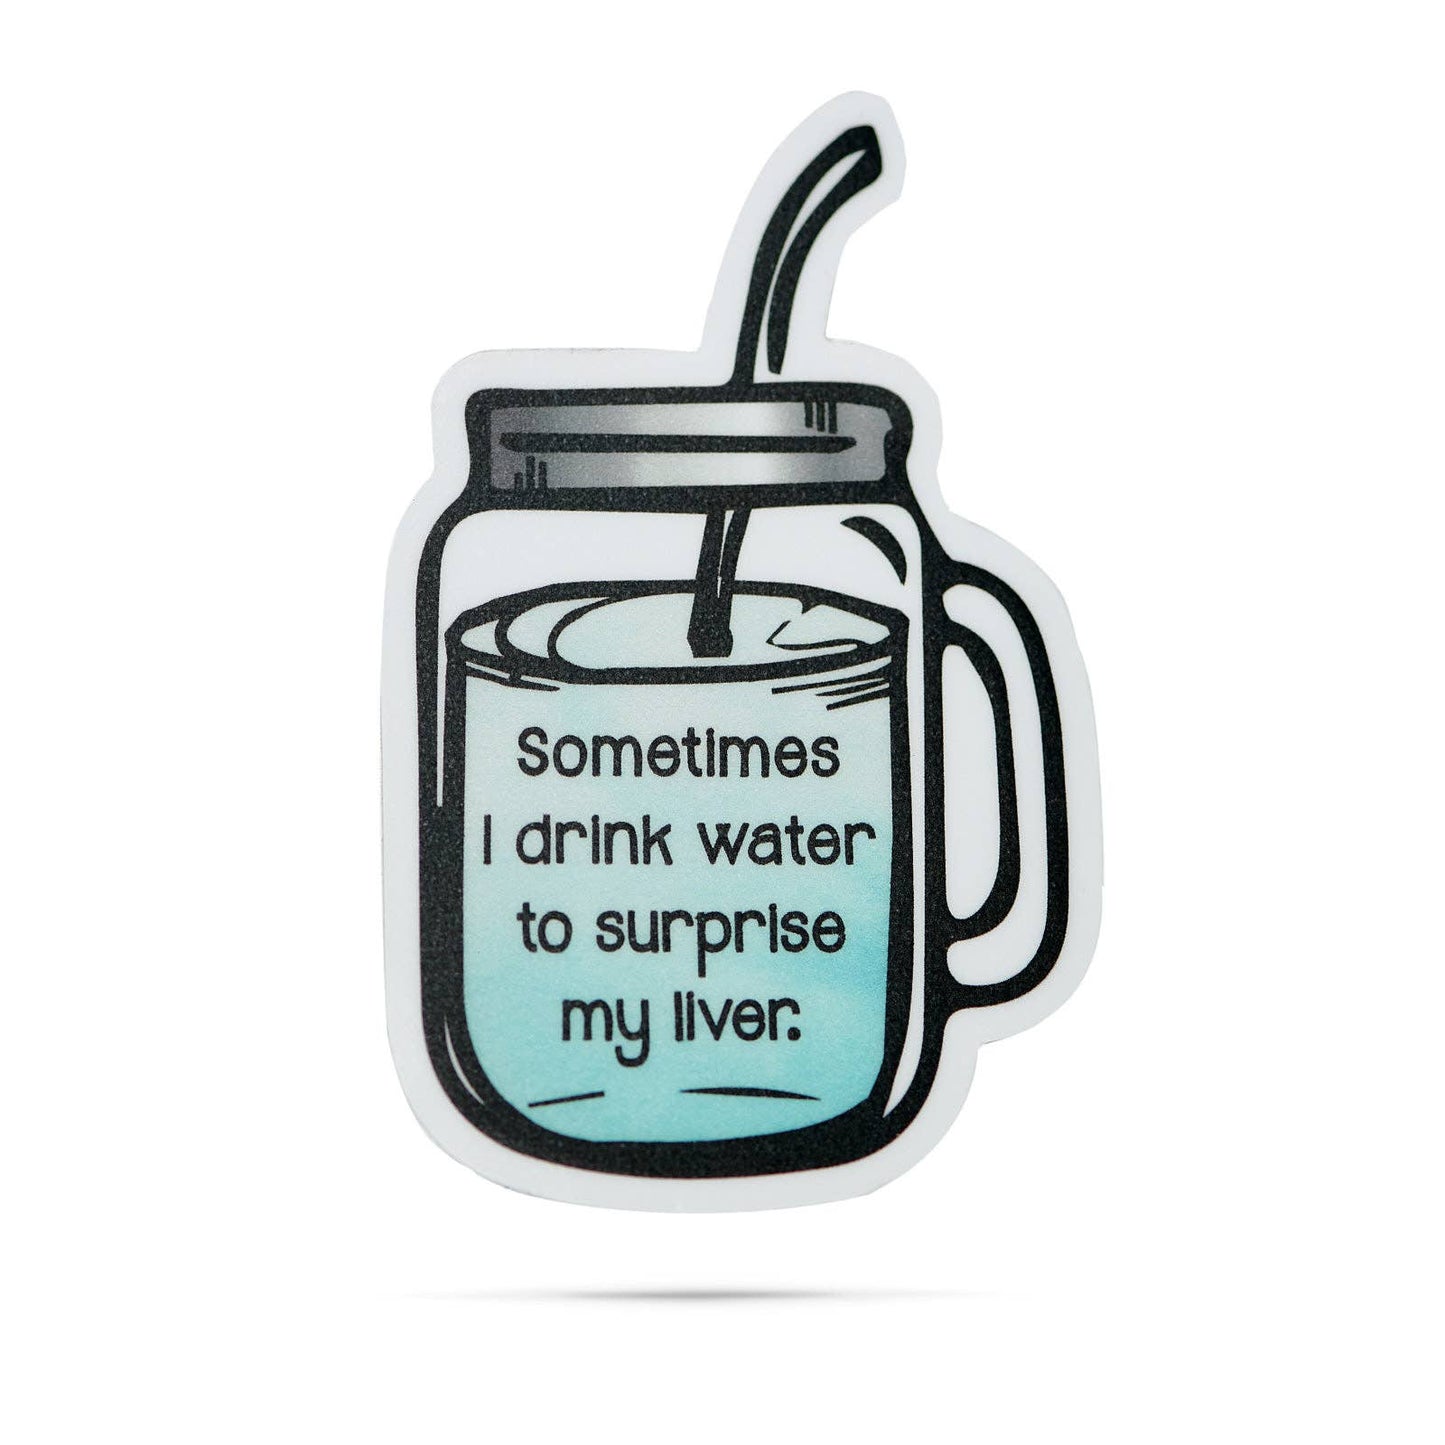 ellembee gift - Sometimes I drink water to surprise my liver funny stickers